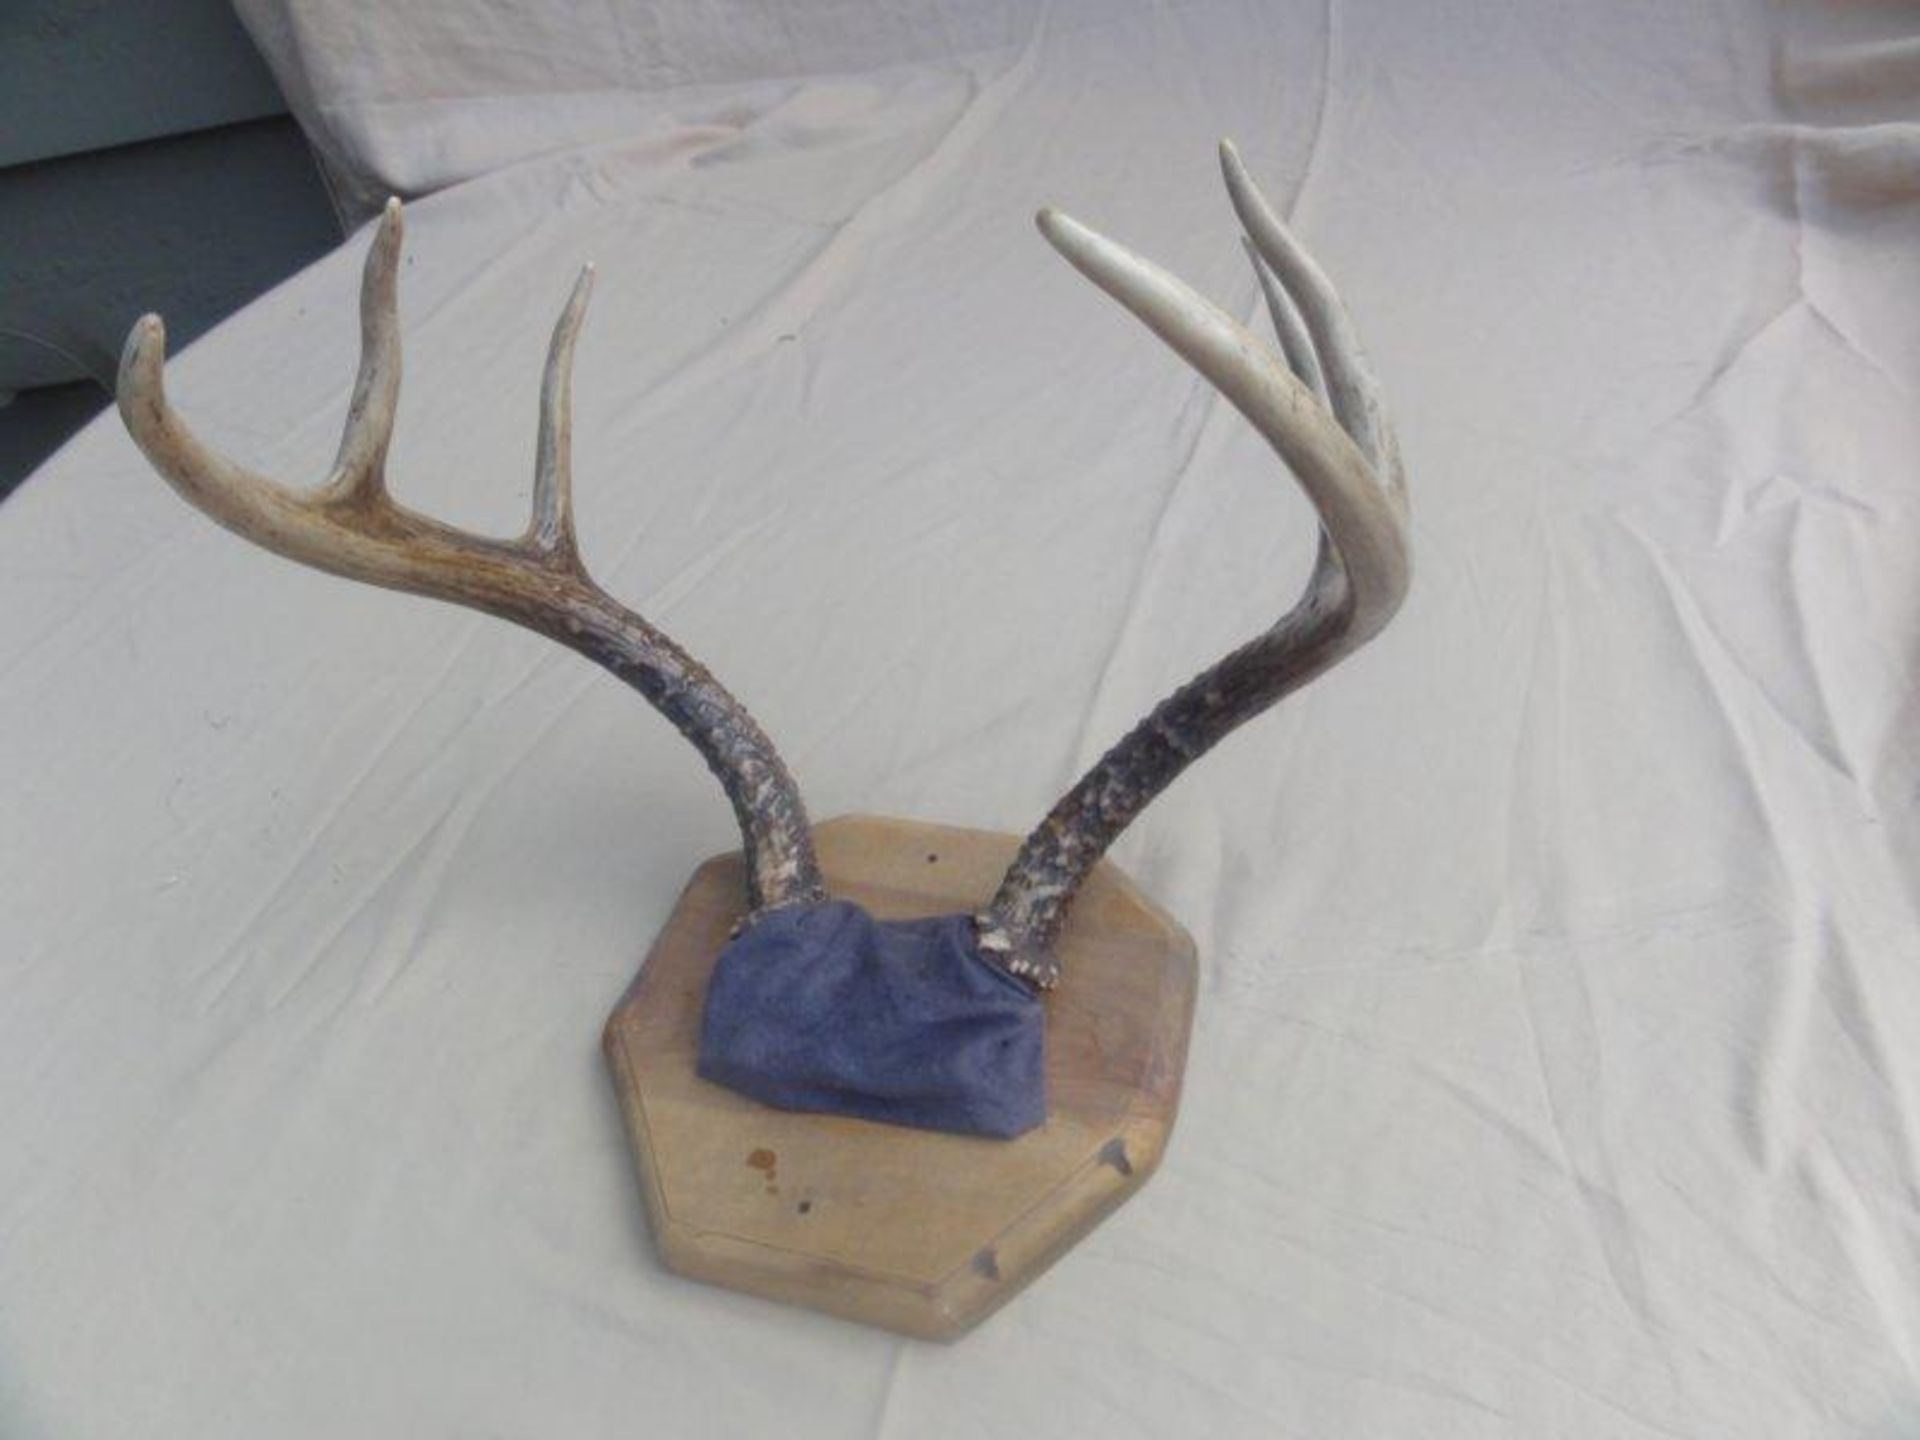 6-Point Antler Mount. Overall Great Condition